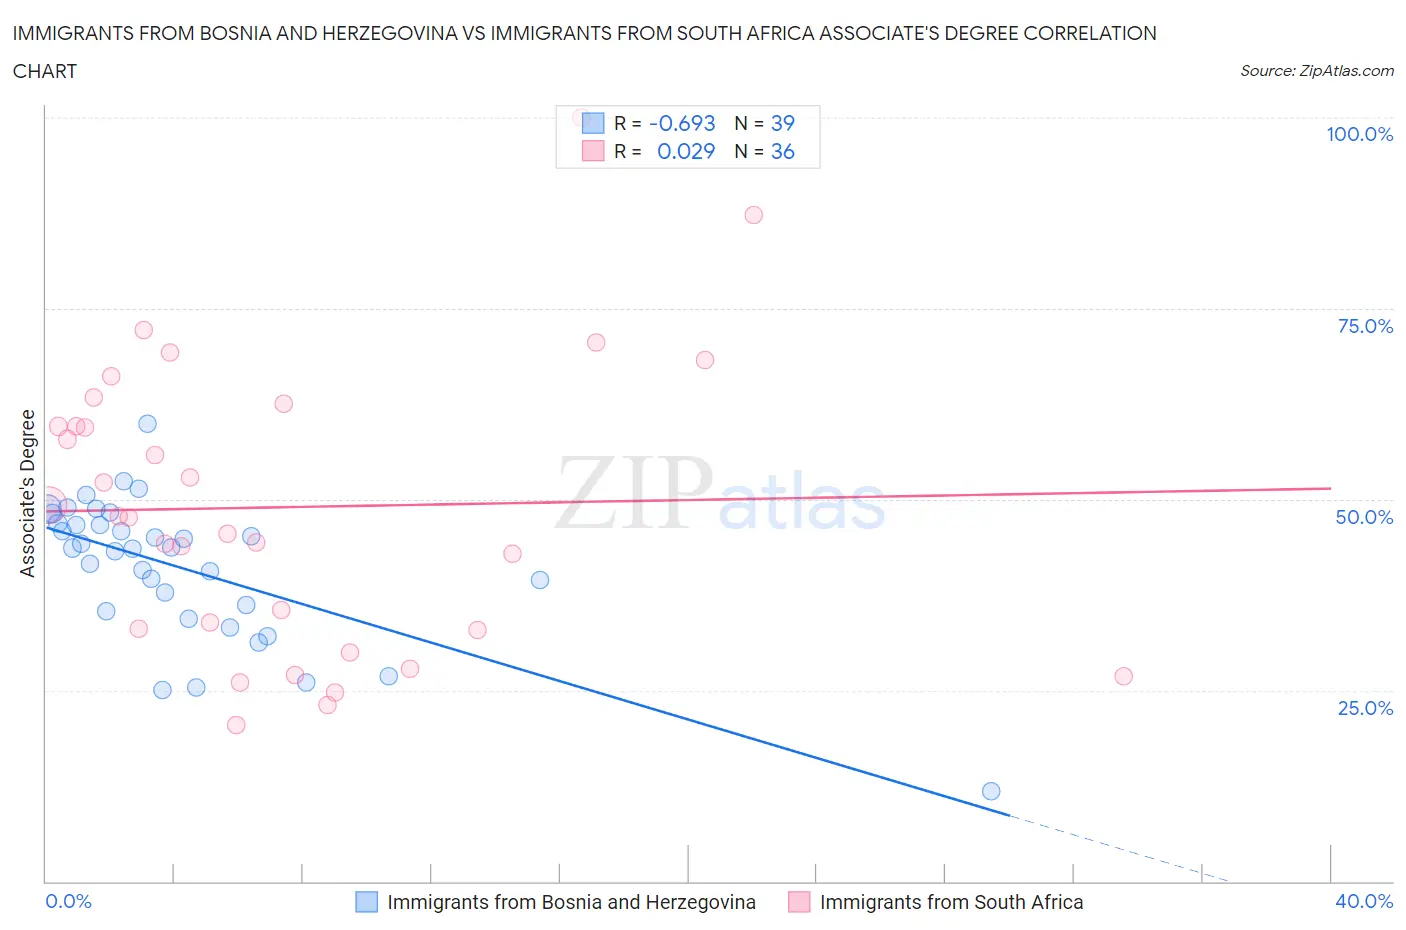 Immigrants from Bosnia and Herzegovina vs Immigrants from South Africa Associate's Degree